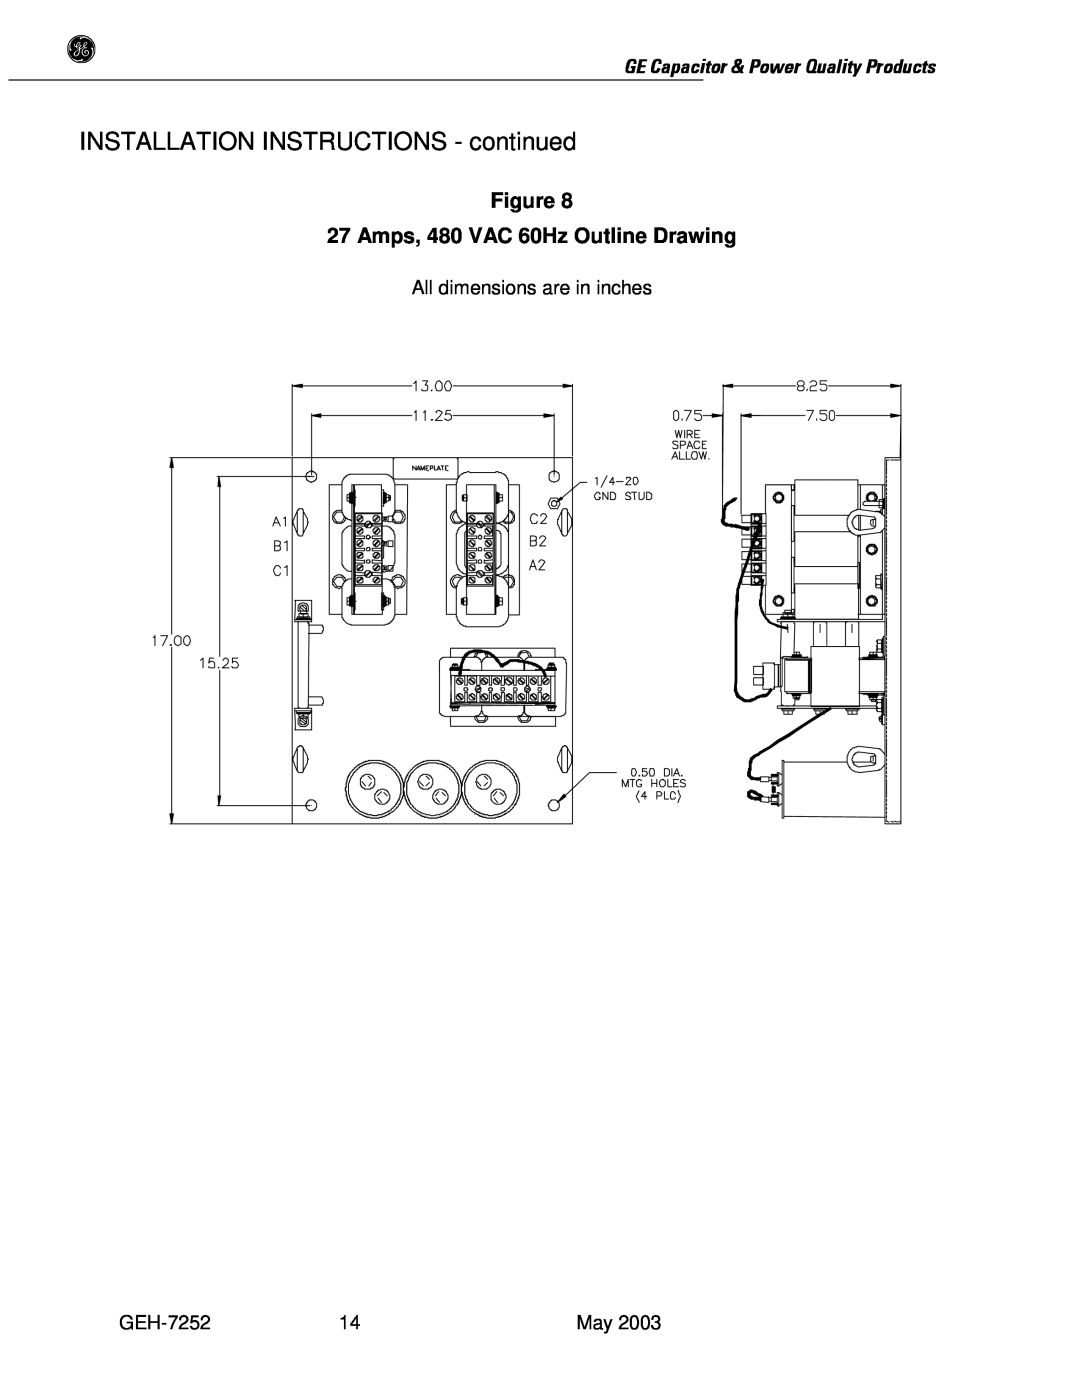 GE SERIES B 480 user manual Amps, 480 VAC 60Hz Outline Drawing, INSTALLATION INSTRUCTIONS - continued 